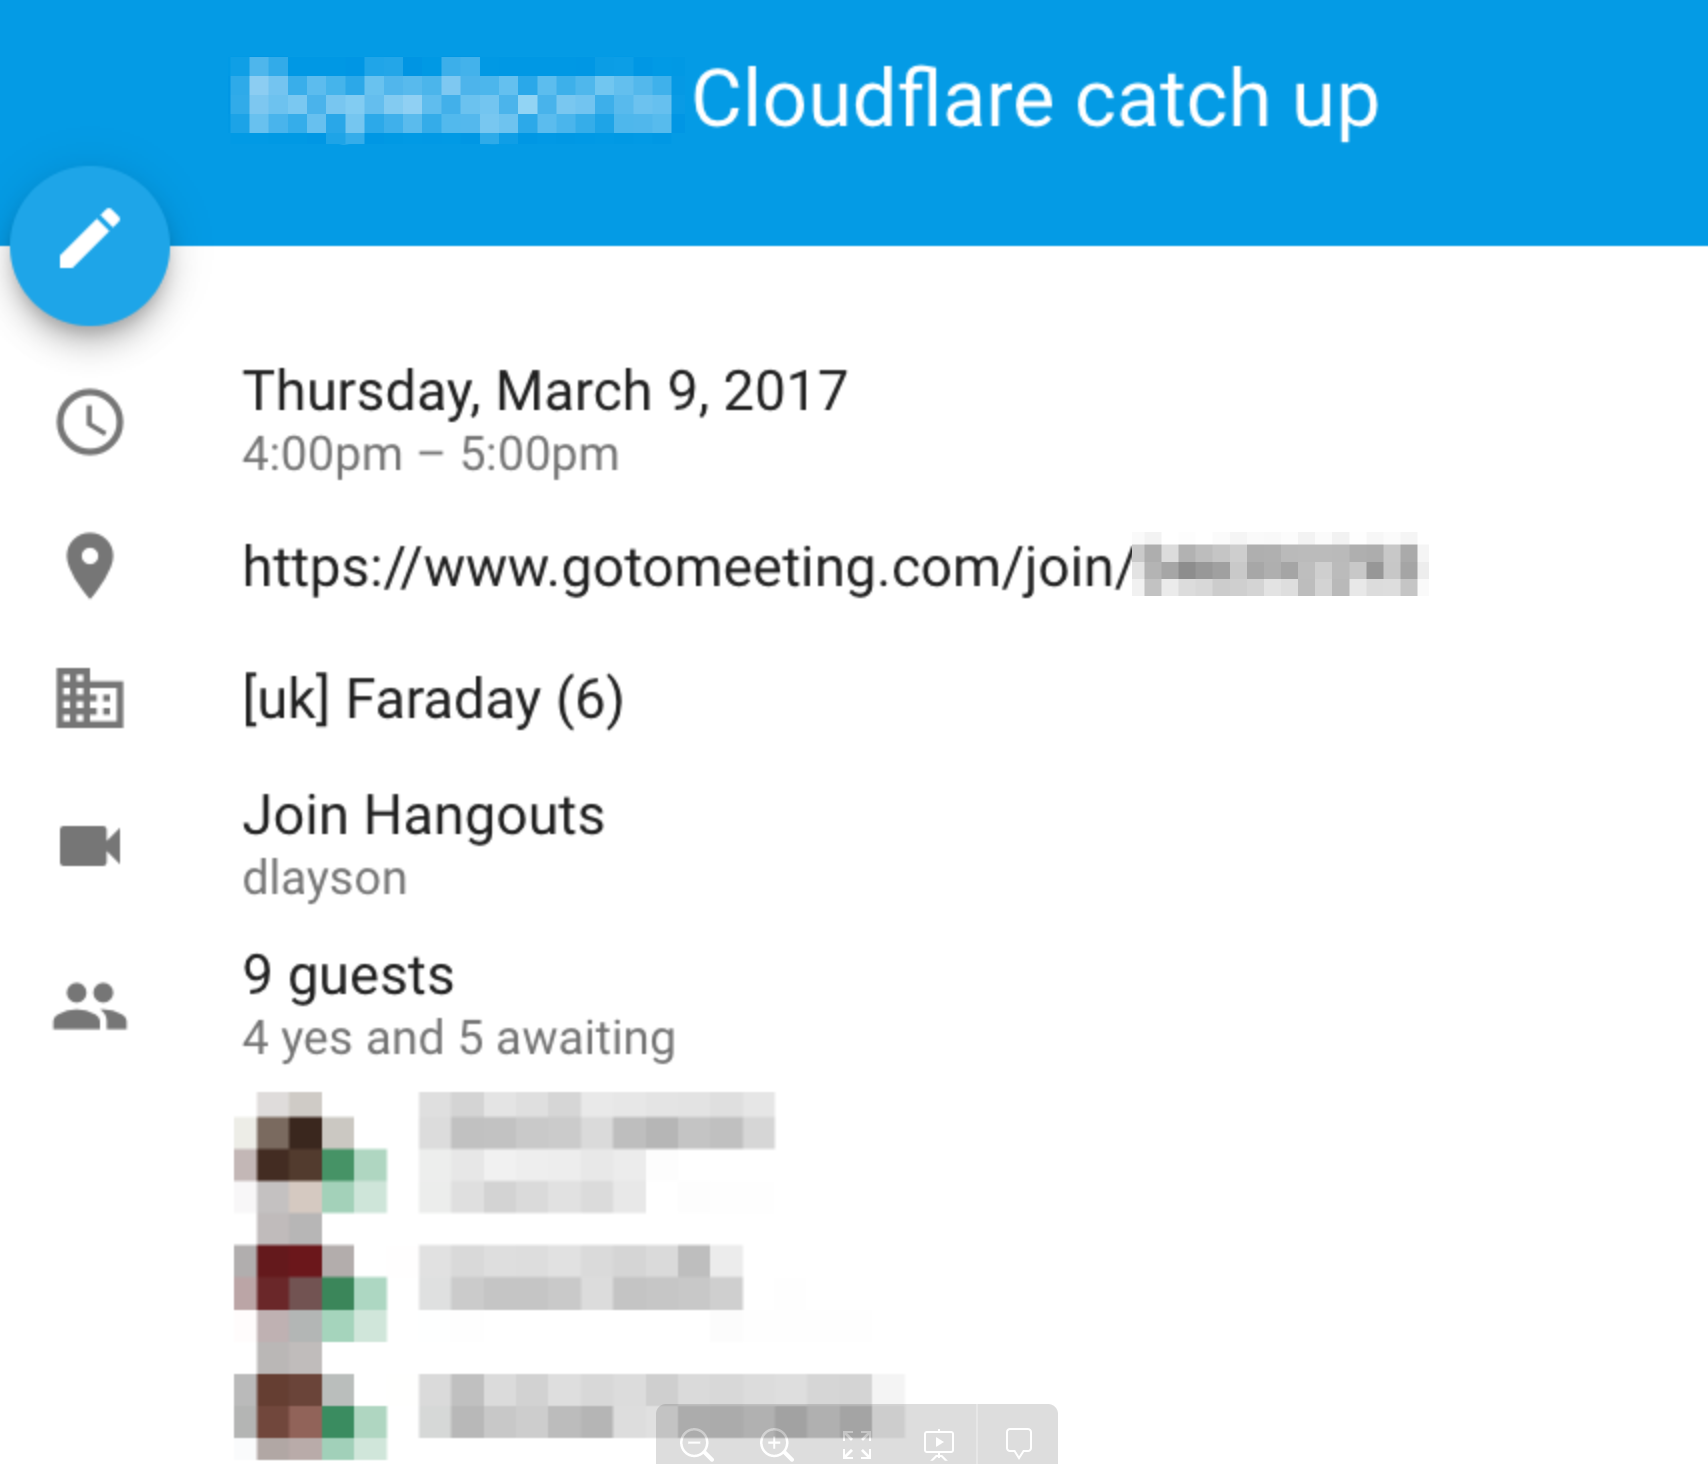 1 year and 3 months working at Cloudflare: How is it going so far?